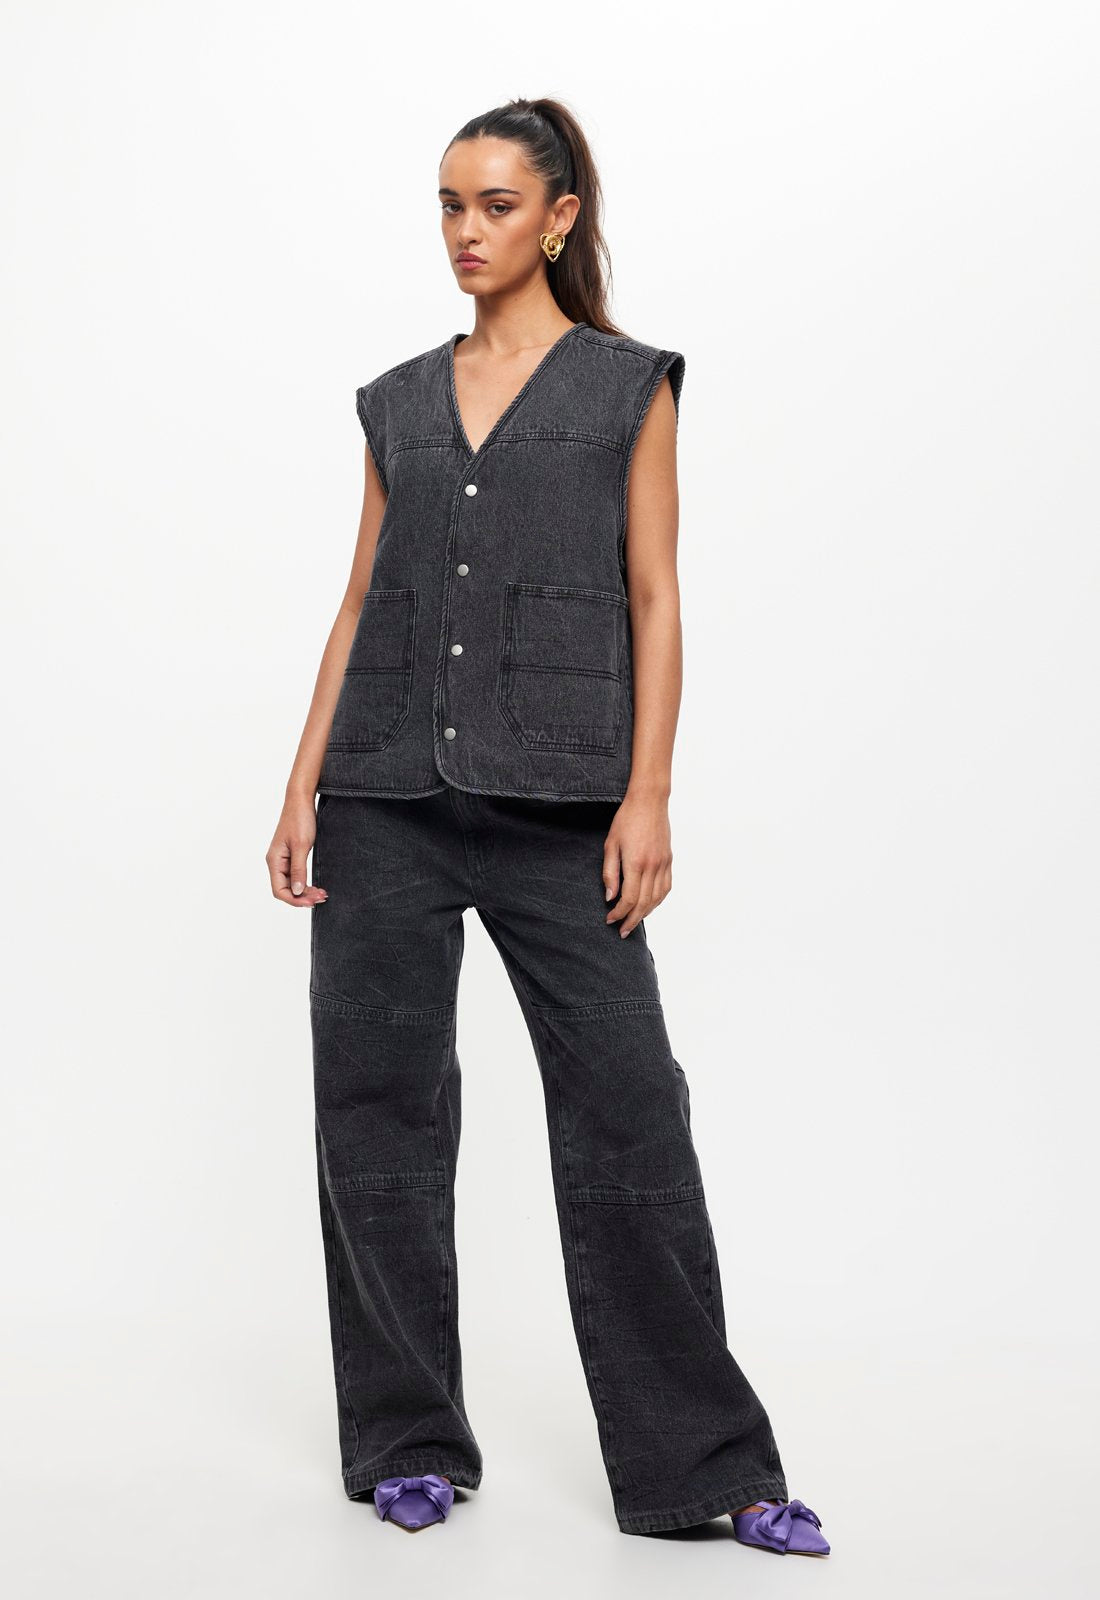 FREEDOM VEST - WASHED CHARCOAL